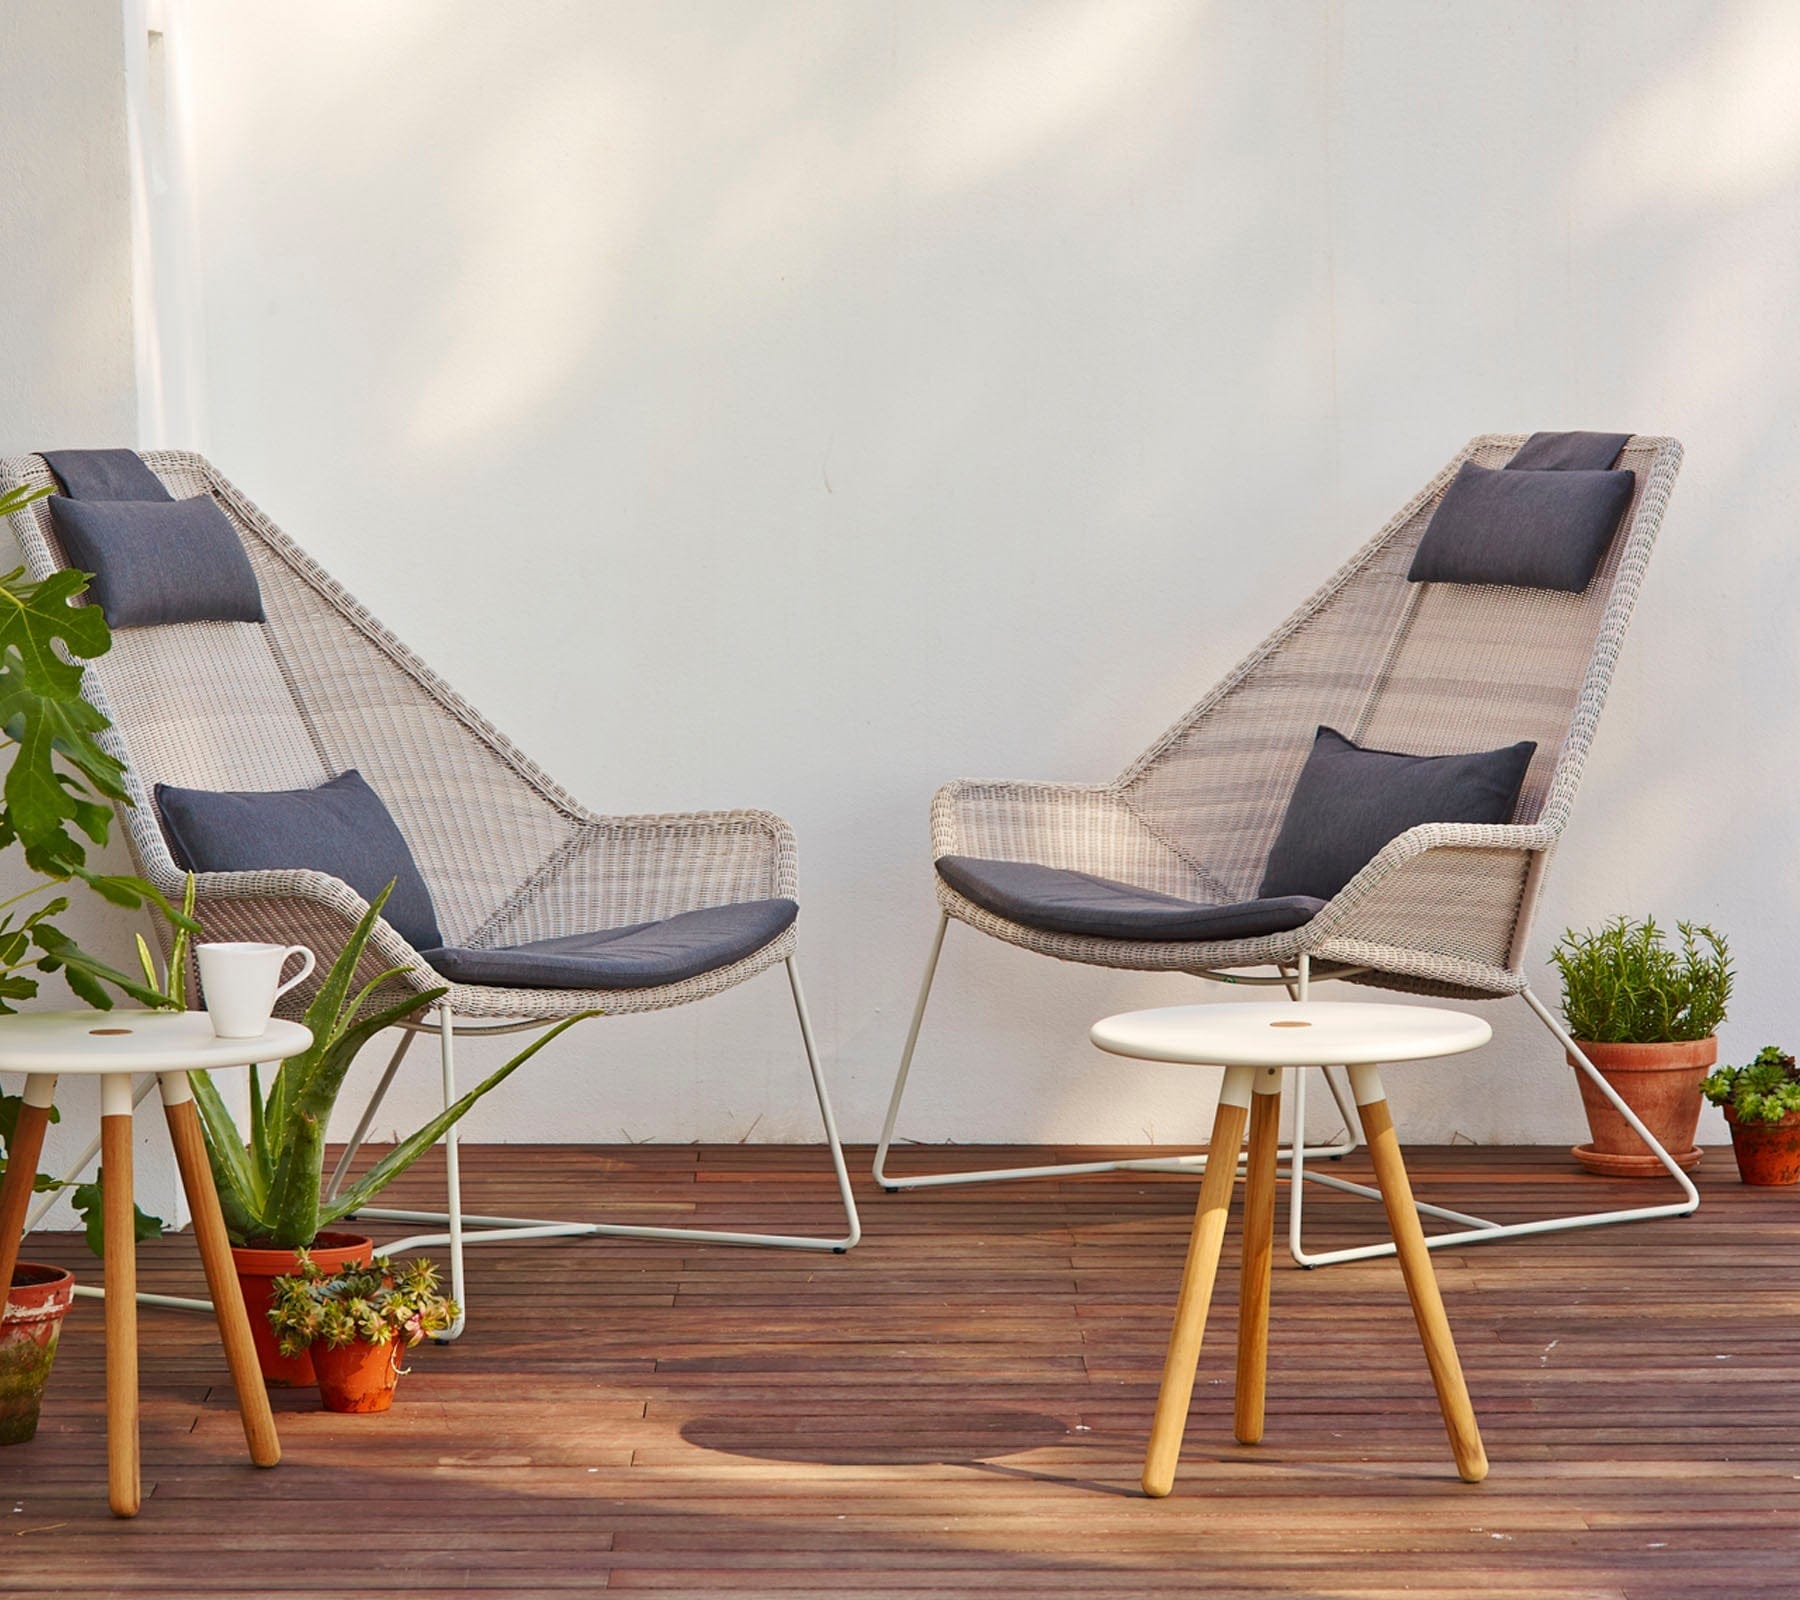 Boxhill's Breeze Highback Outdoor Chair White Grey lifestyle image on wooden platform with Area Coffee Table Chair